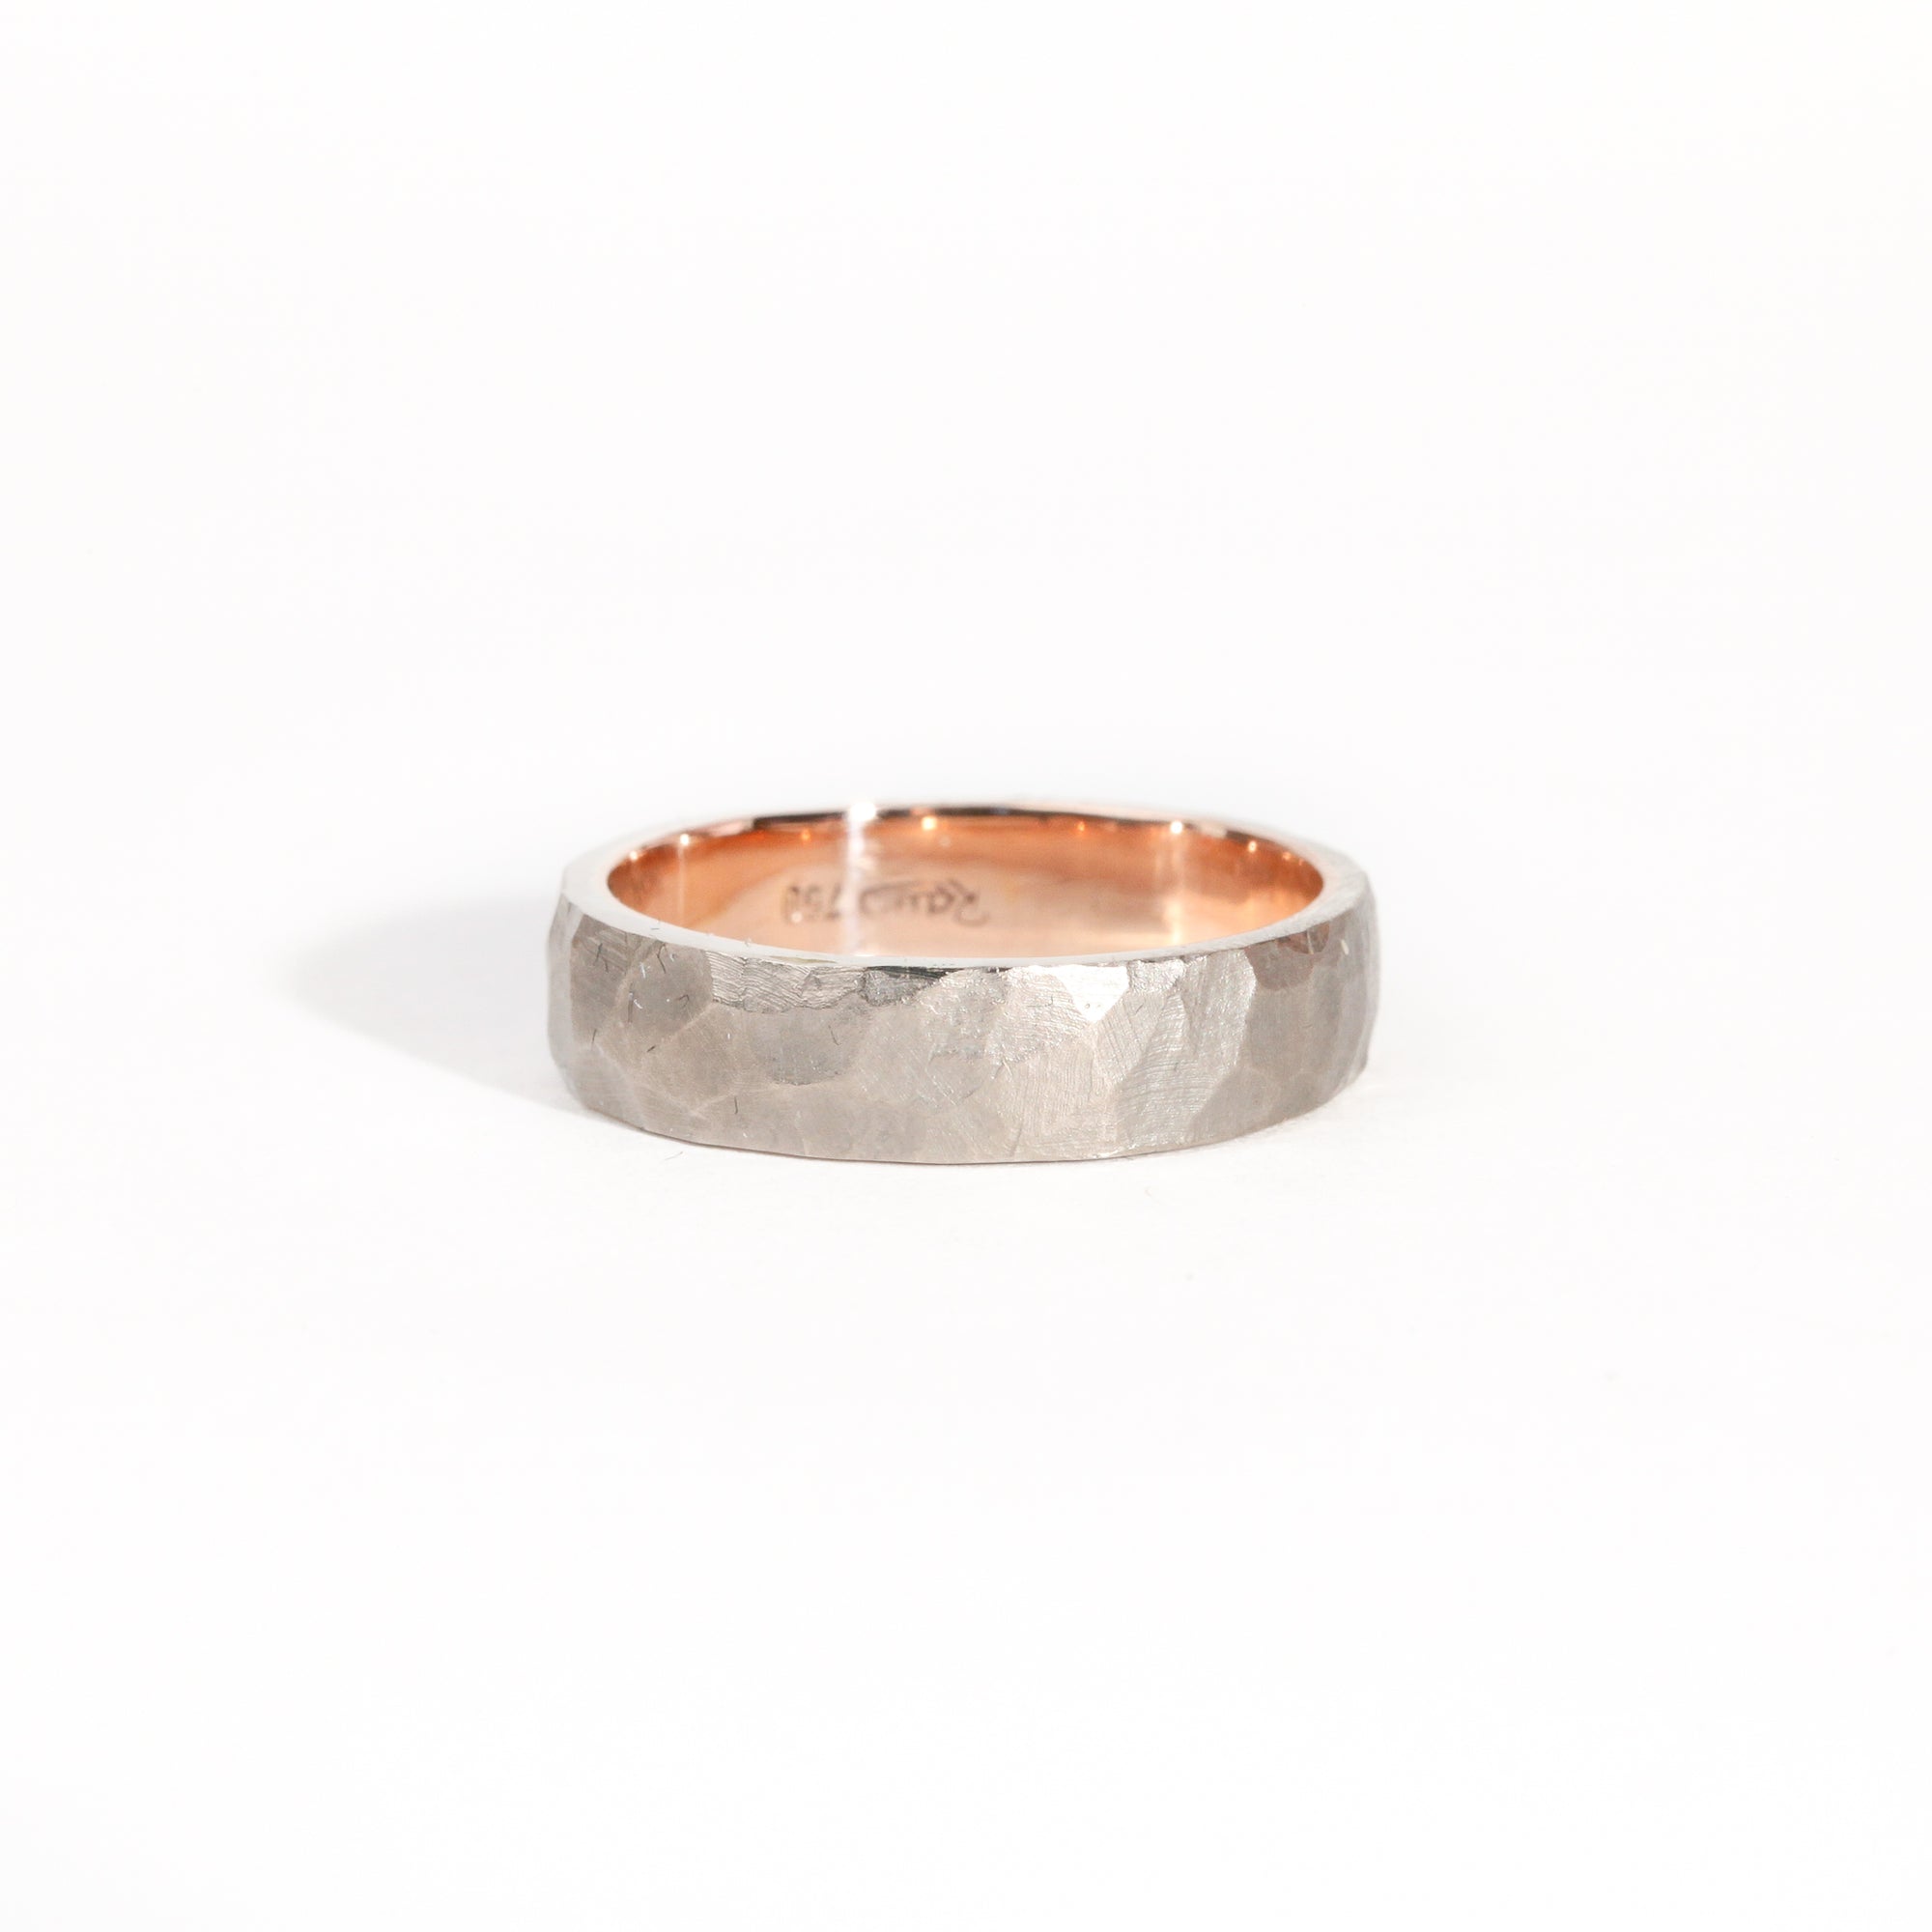 Hand finished 18ct rose gold sleeve with 18ct white gold exterior.